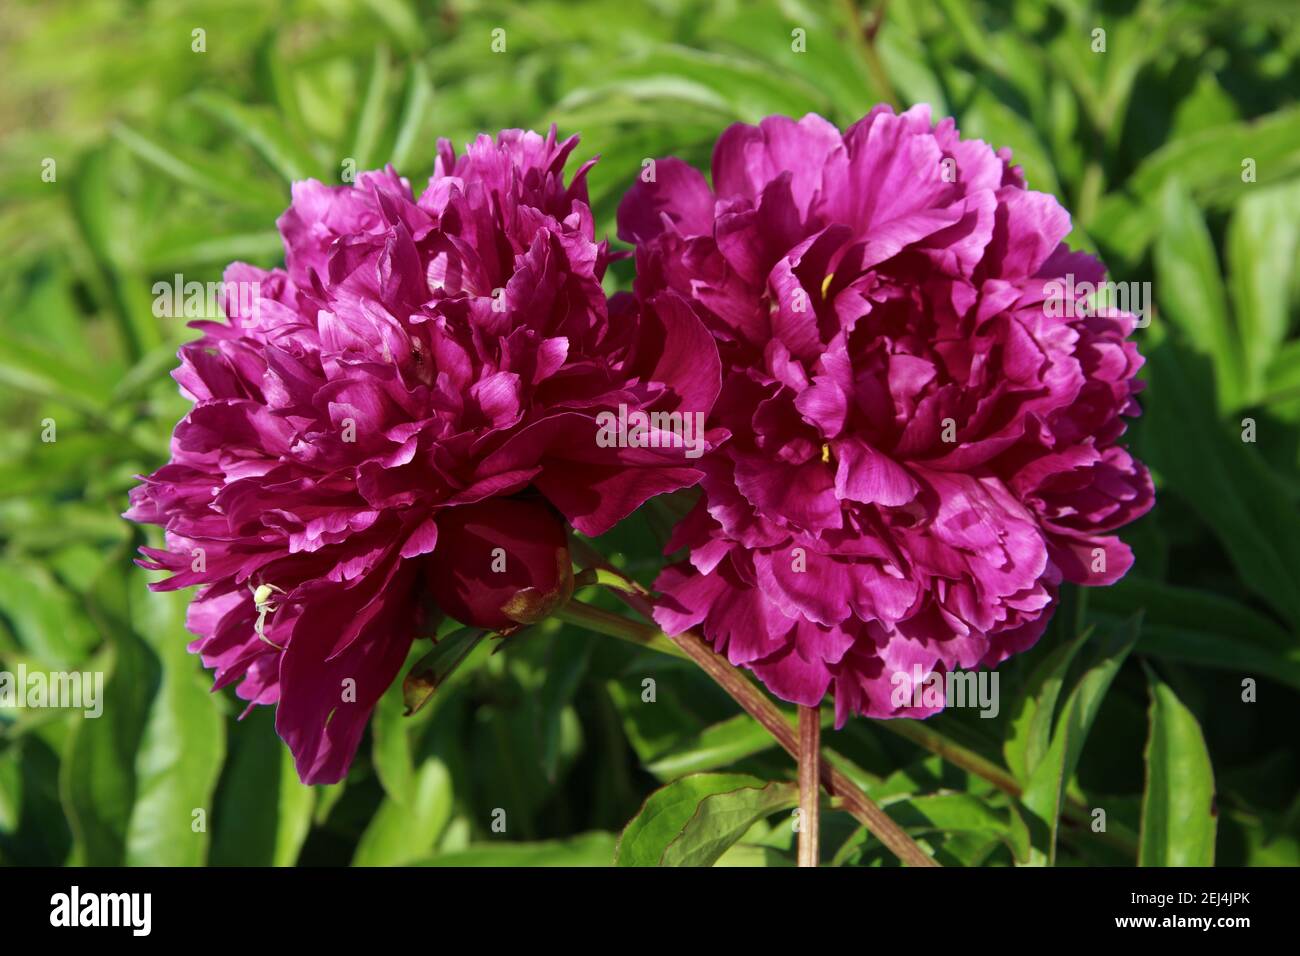 Two purple flowers with buds close to each other and stems crosswise. Stock Photo